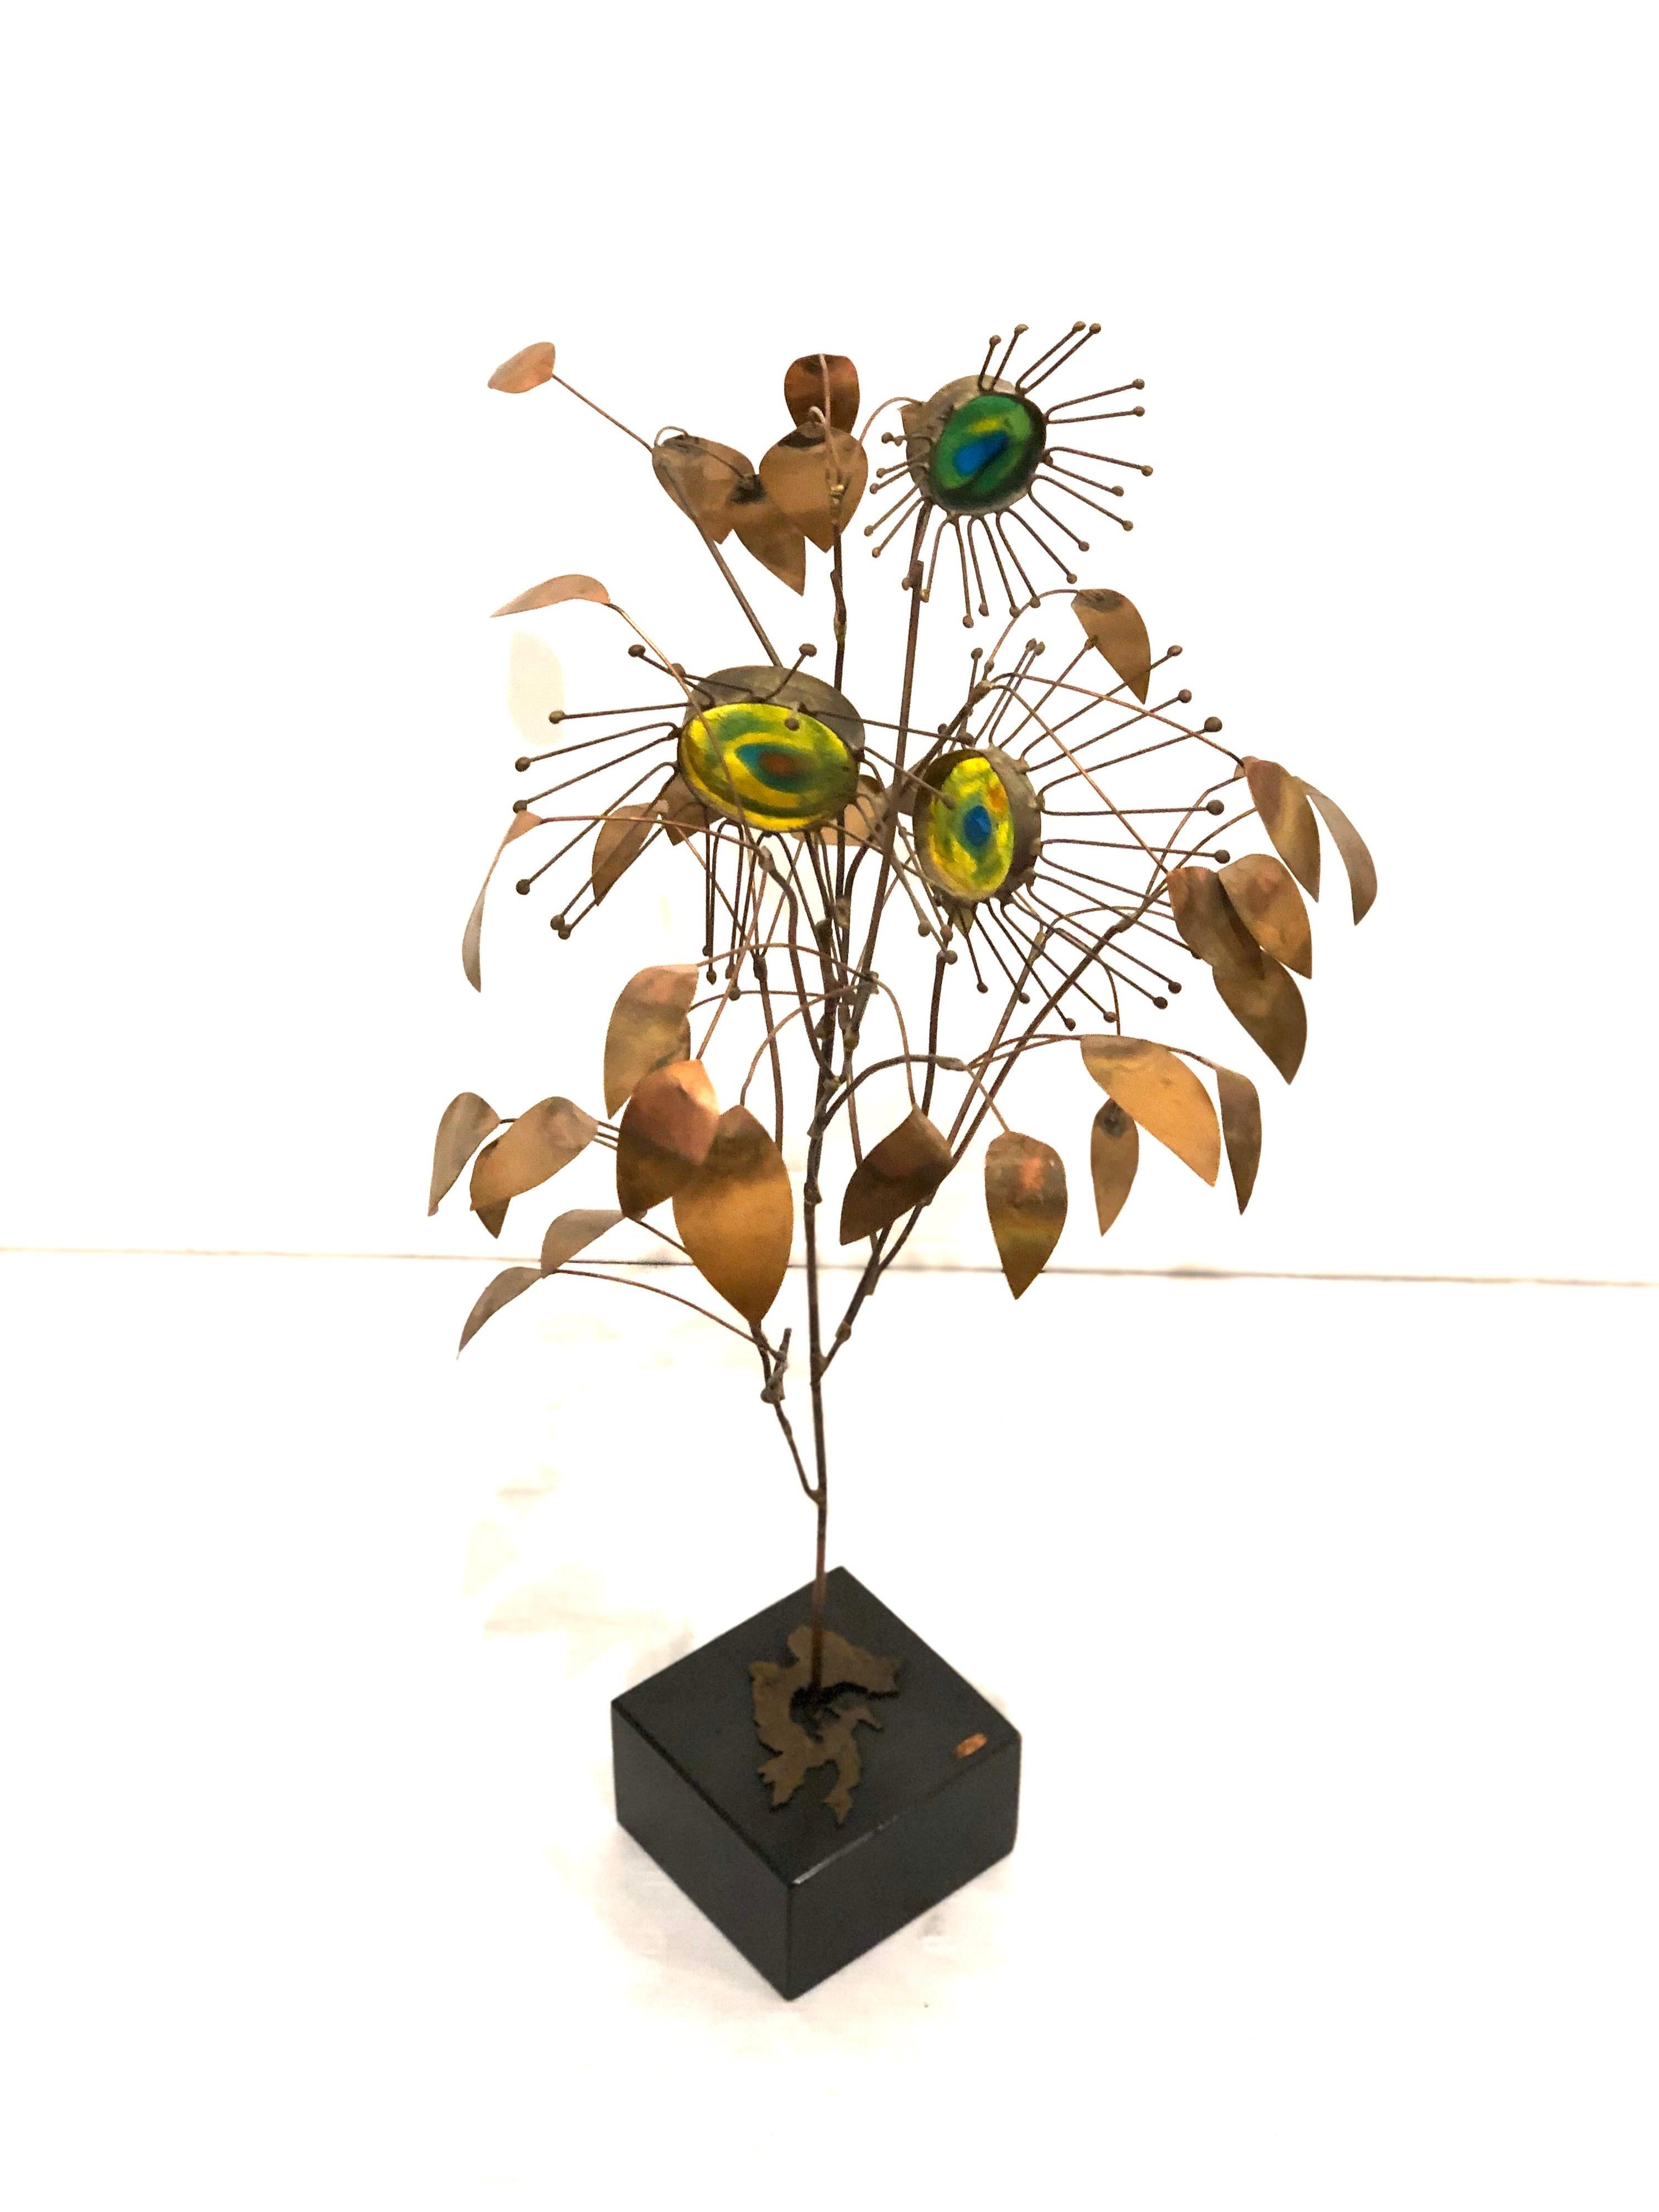 A beautiful unique studio Jere brutal tree sculpture, circa 1966 signed and dated colorful resin inserts make this sculpture unique we can't find another one like it, this piece its very nice and impressive in copper, brass, and resin sitting on a